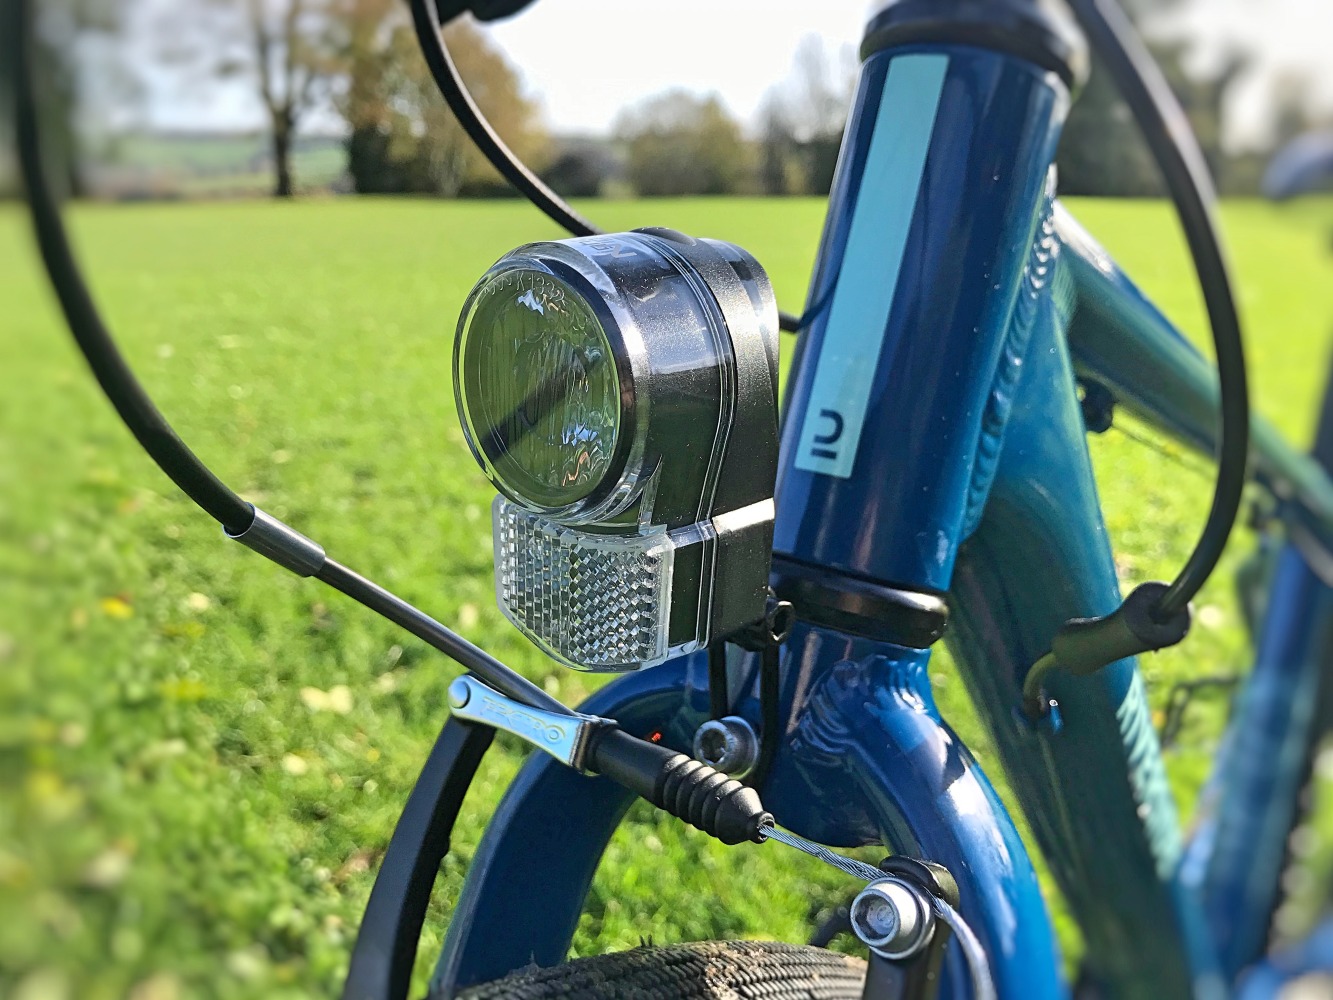 BTwin Riverside 900 26 inch wheel hybrid - front light which comes fitted as standard when you buy this bike